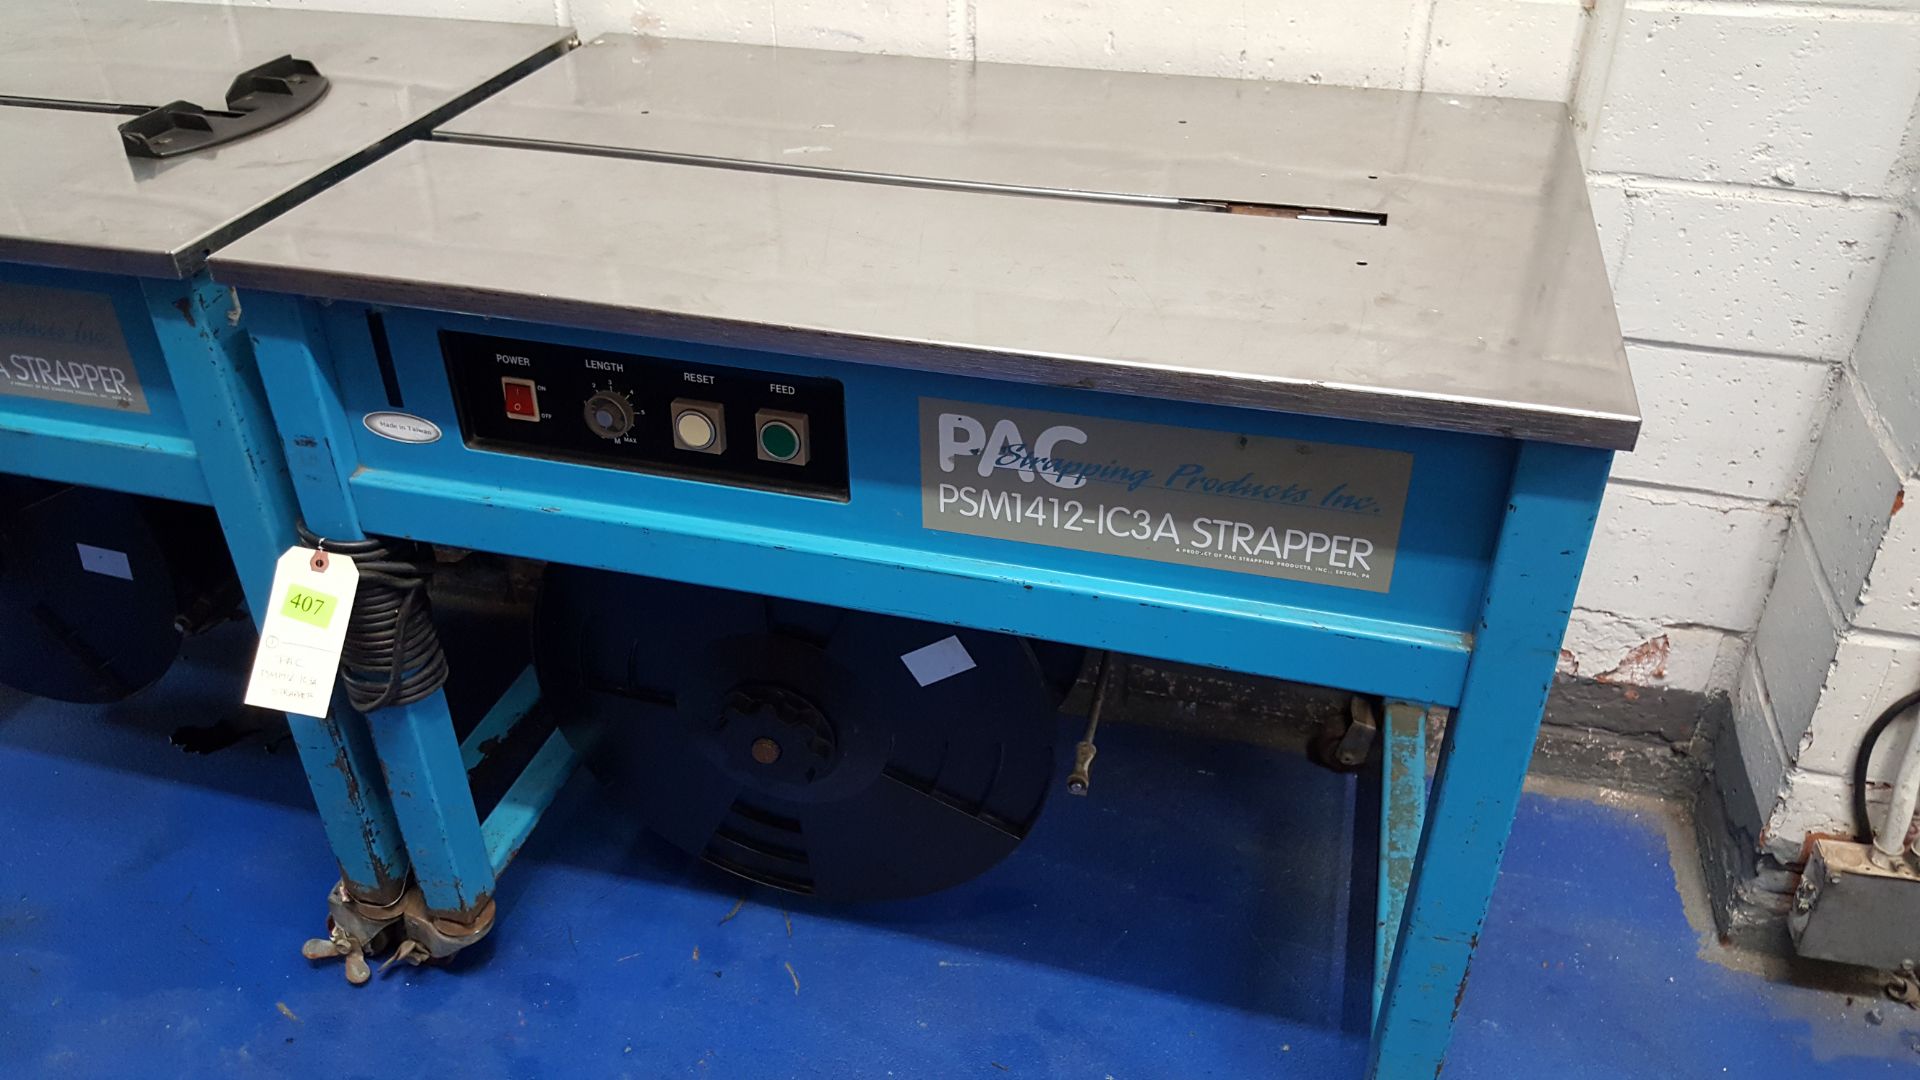 PAC PSM1412-1C3A STRAPPER